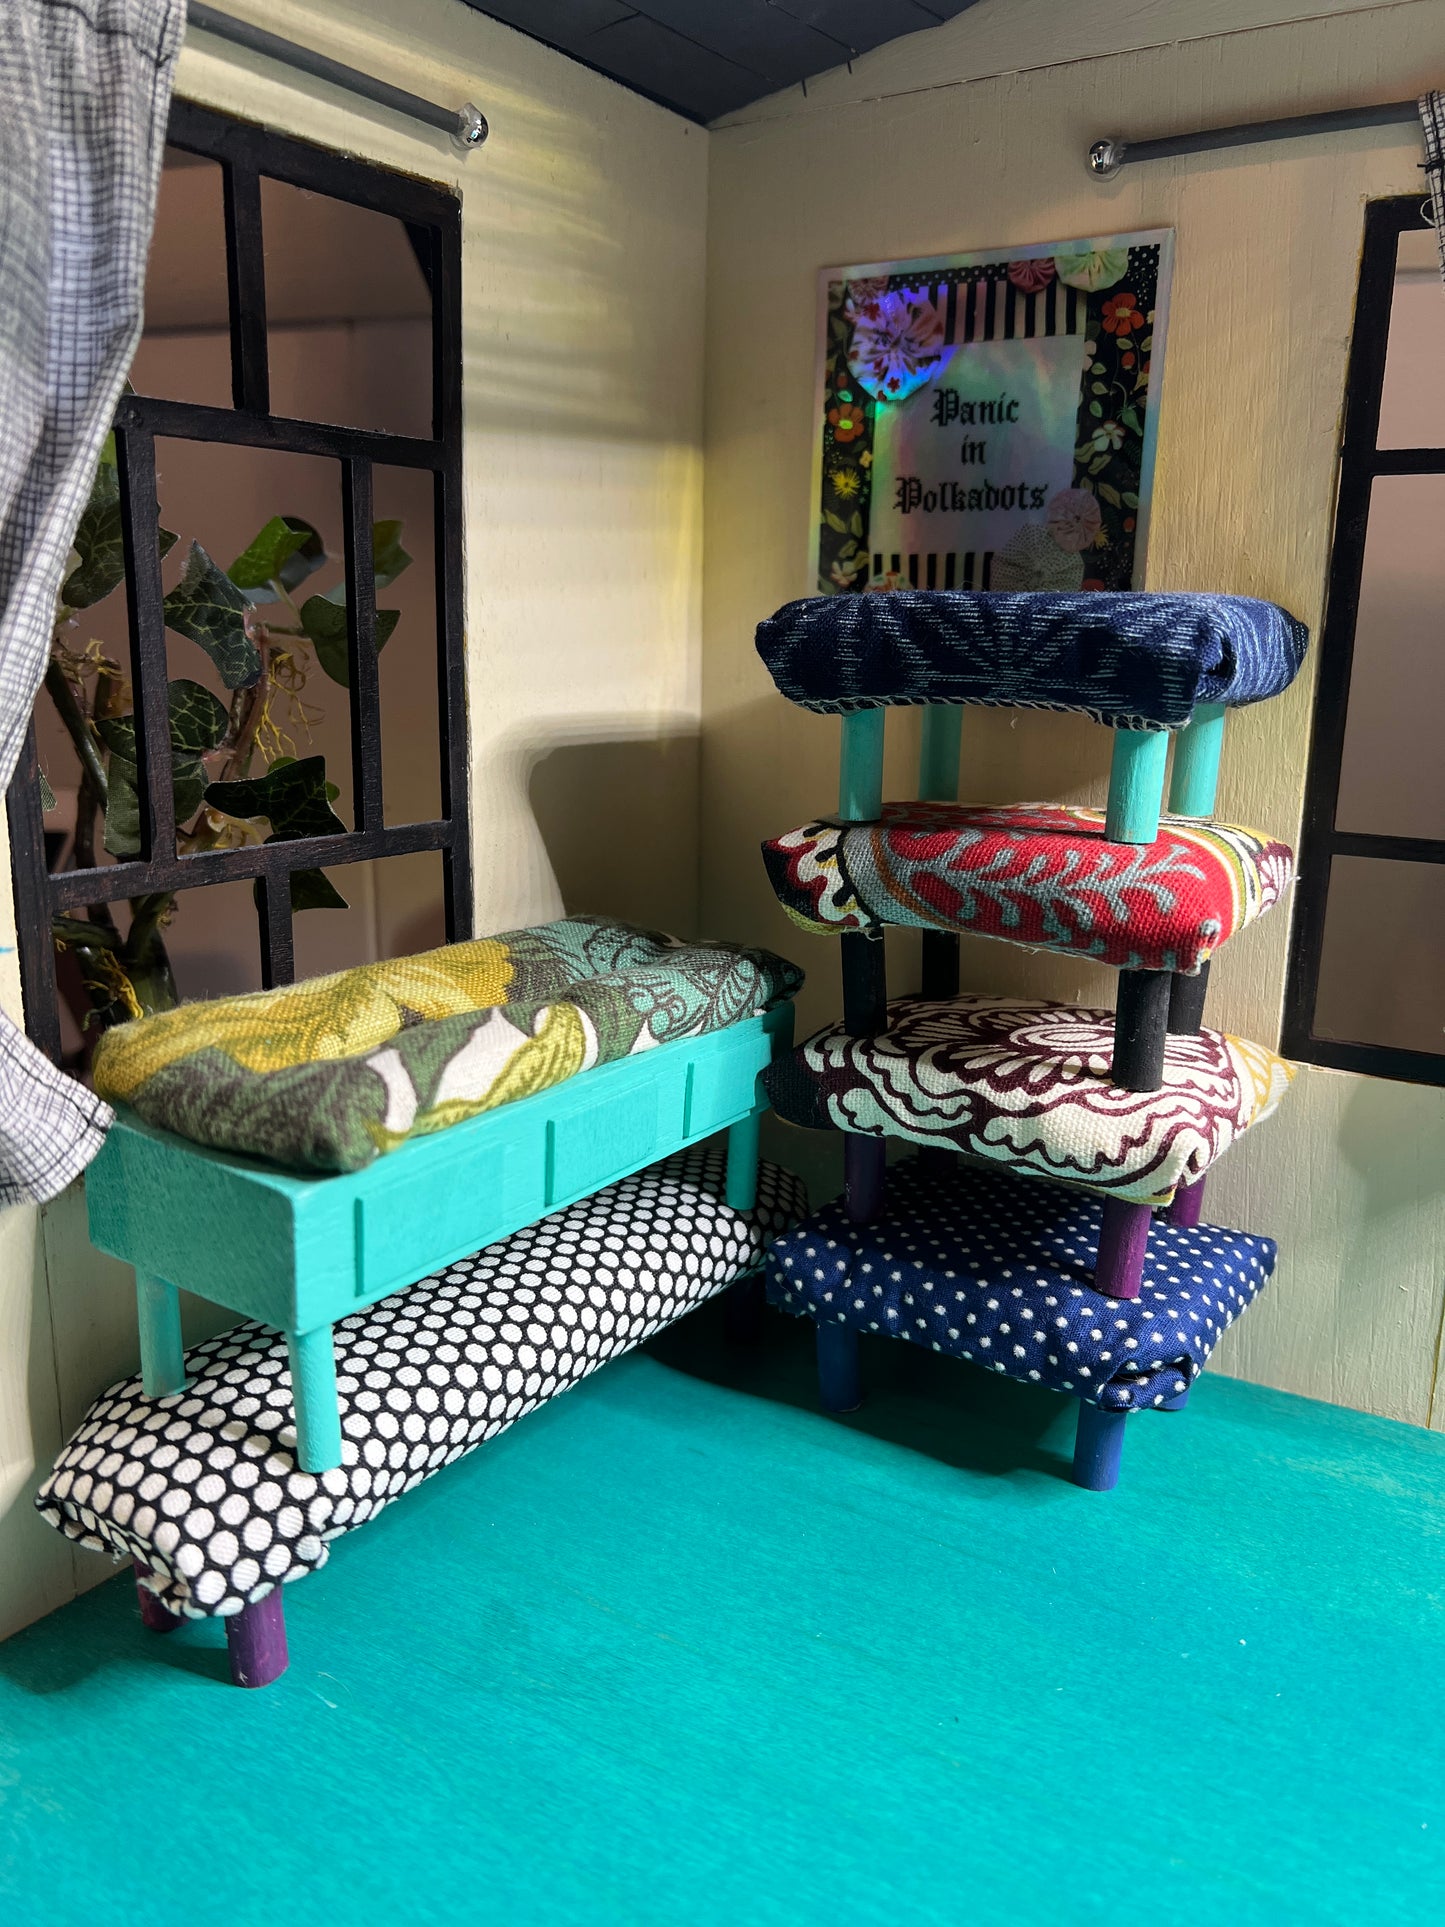 stacked dollhouse ottomans and benches, in a miniature room, with windows and a Panic in Polkadots sticker on the wall